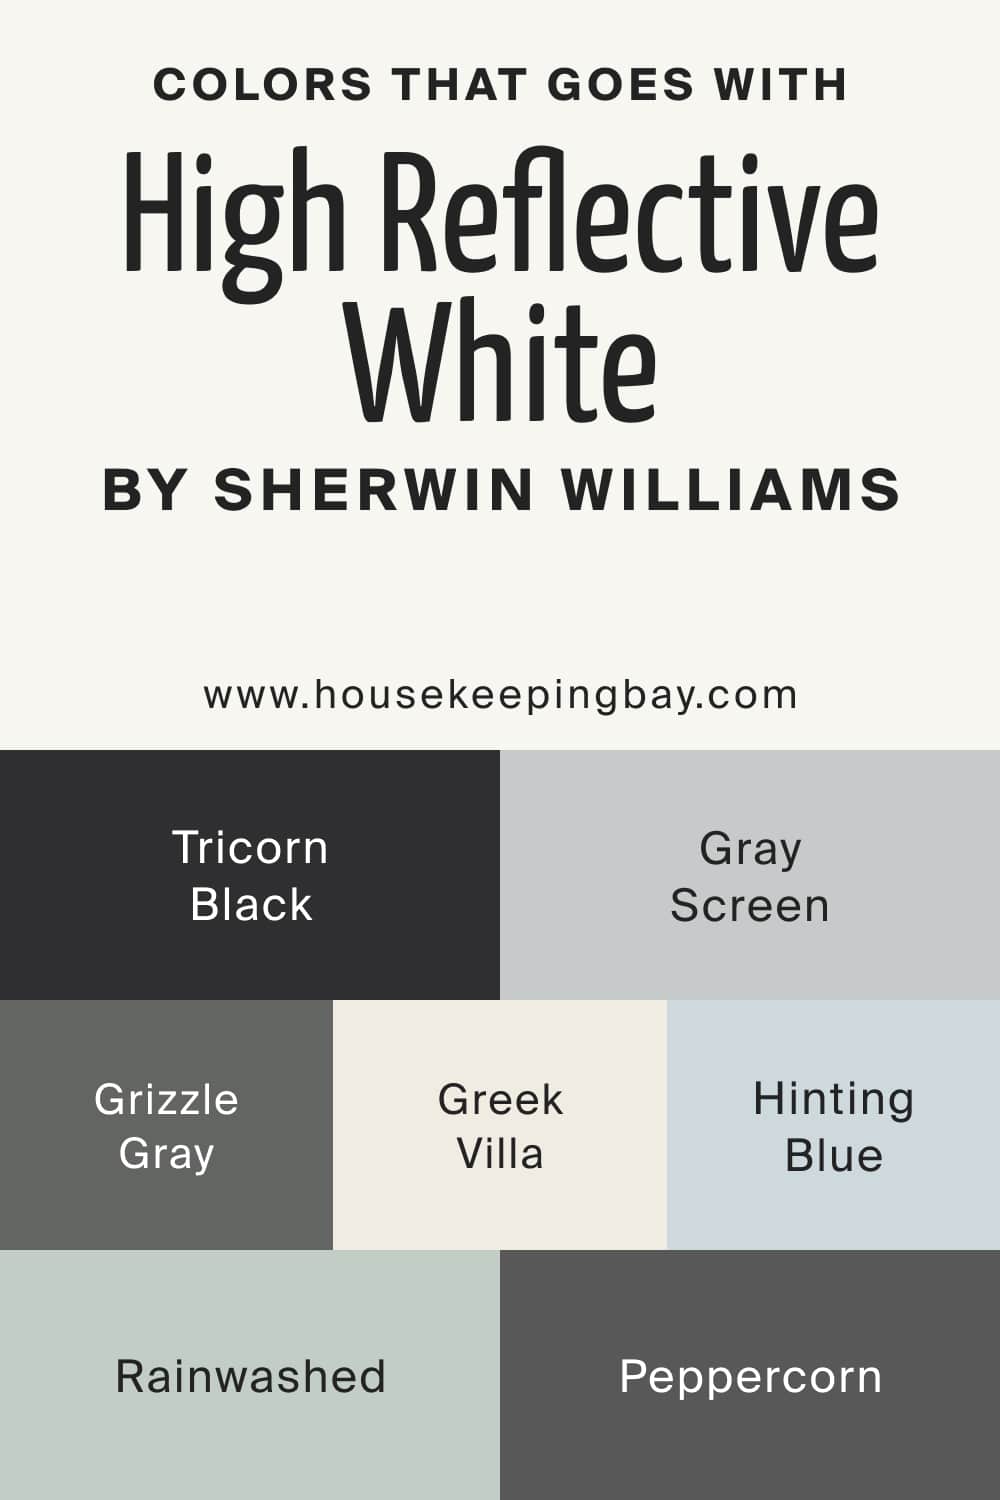 Colors that goes with High Reflective White SW 7757 by Sherwin Williams